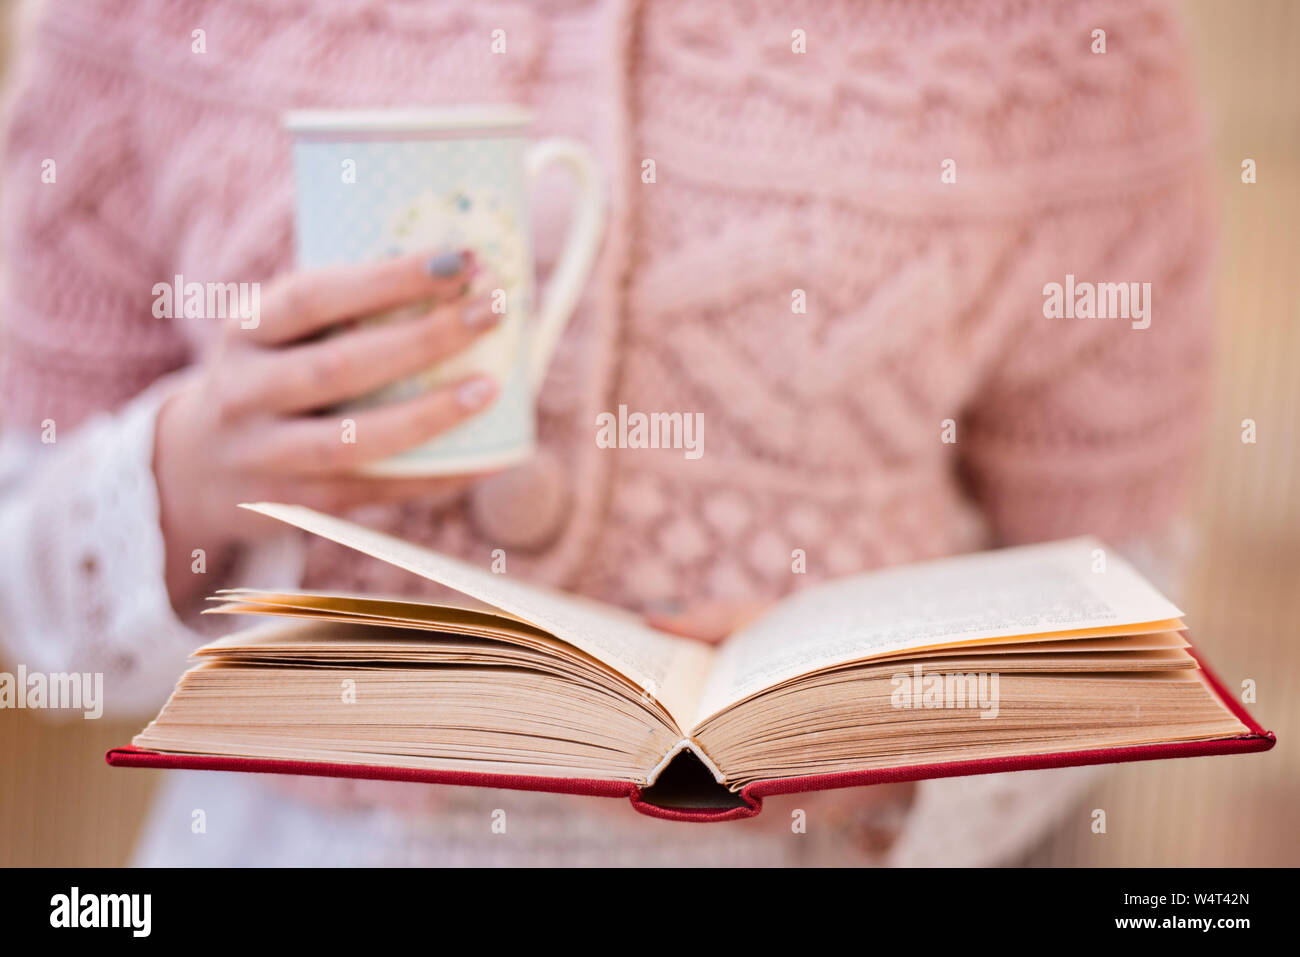 Teenage girl reading a book and drinking a cup of tea Stock Photo